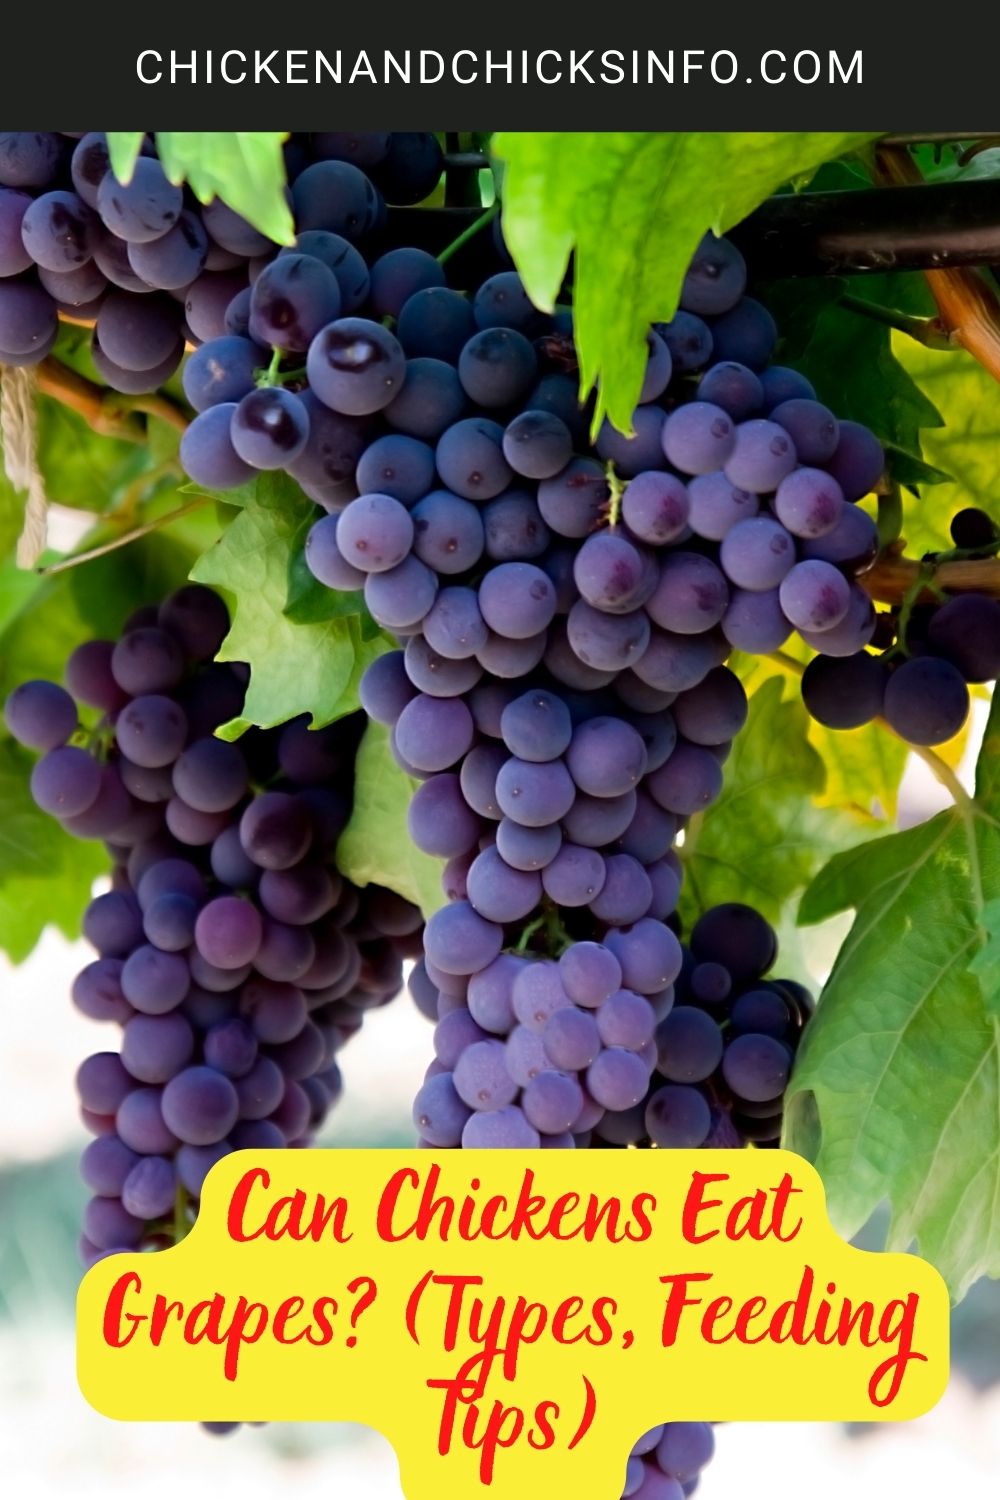 Can Chickens Eat Grapes? (Types, Feeding Tips) poster.
